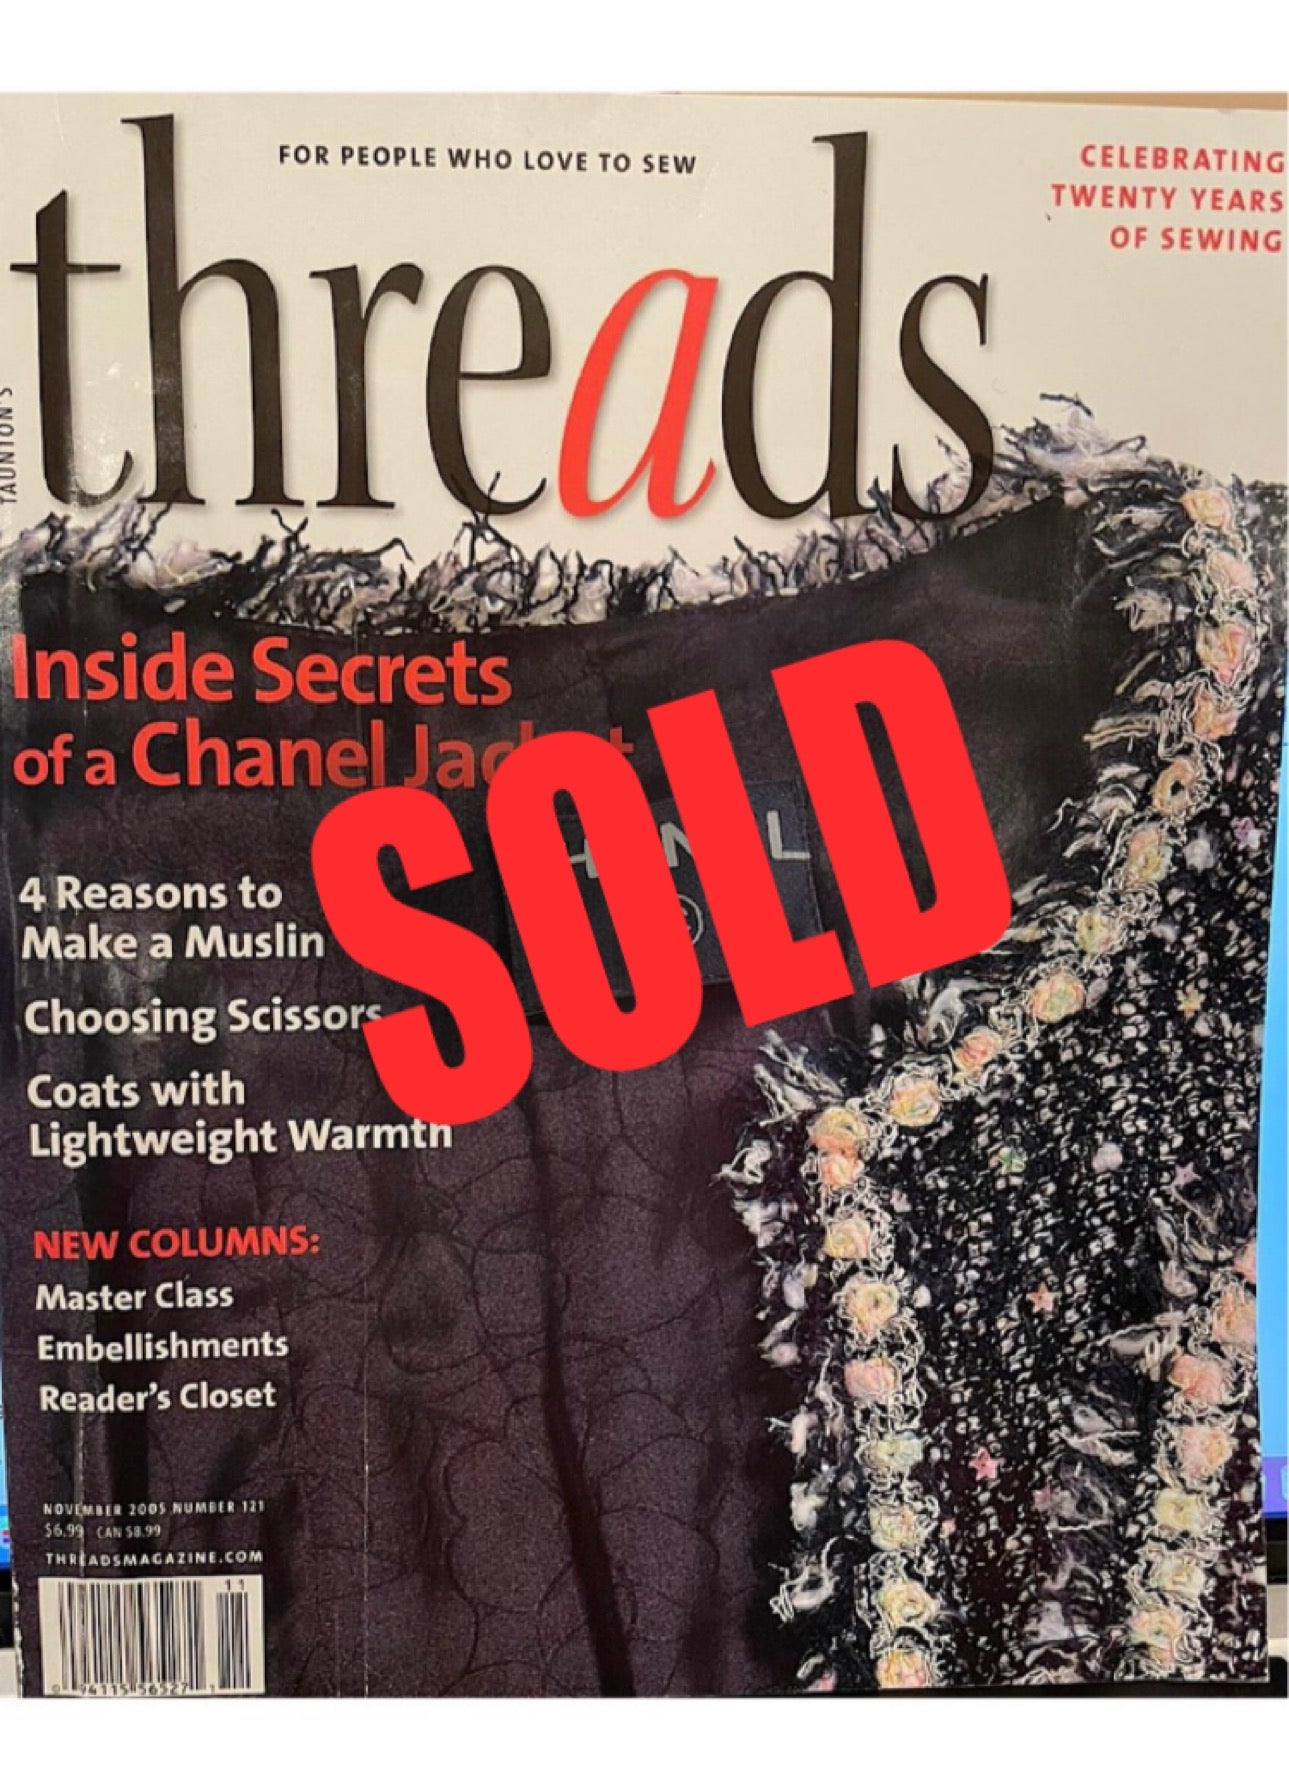 “THREADS” Magazine 2005 contains inside “Secrets of a Chanel Jacket